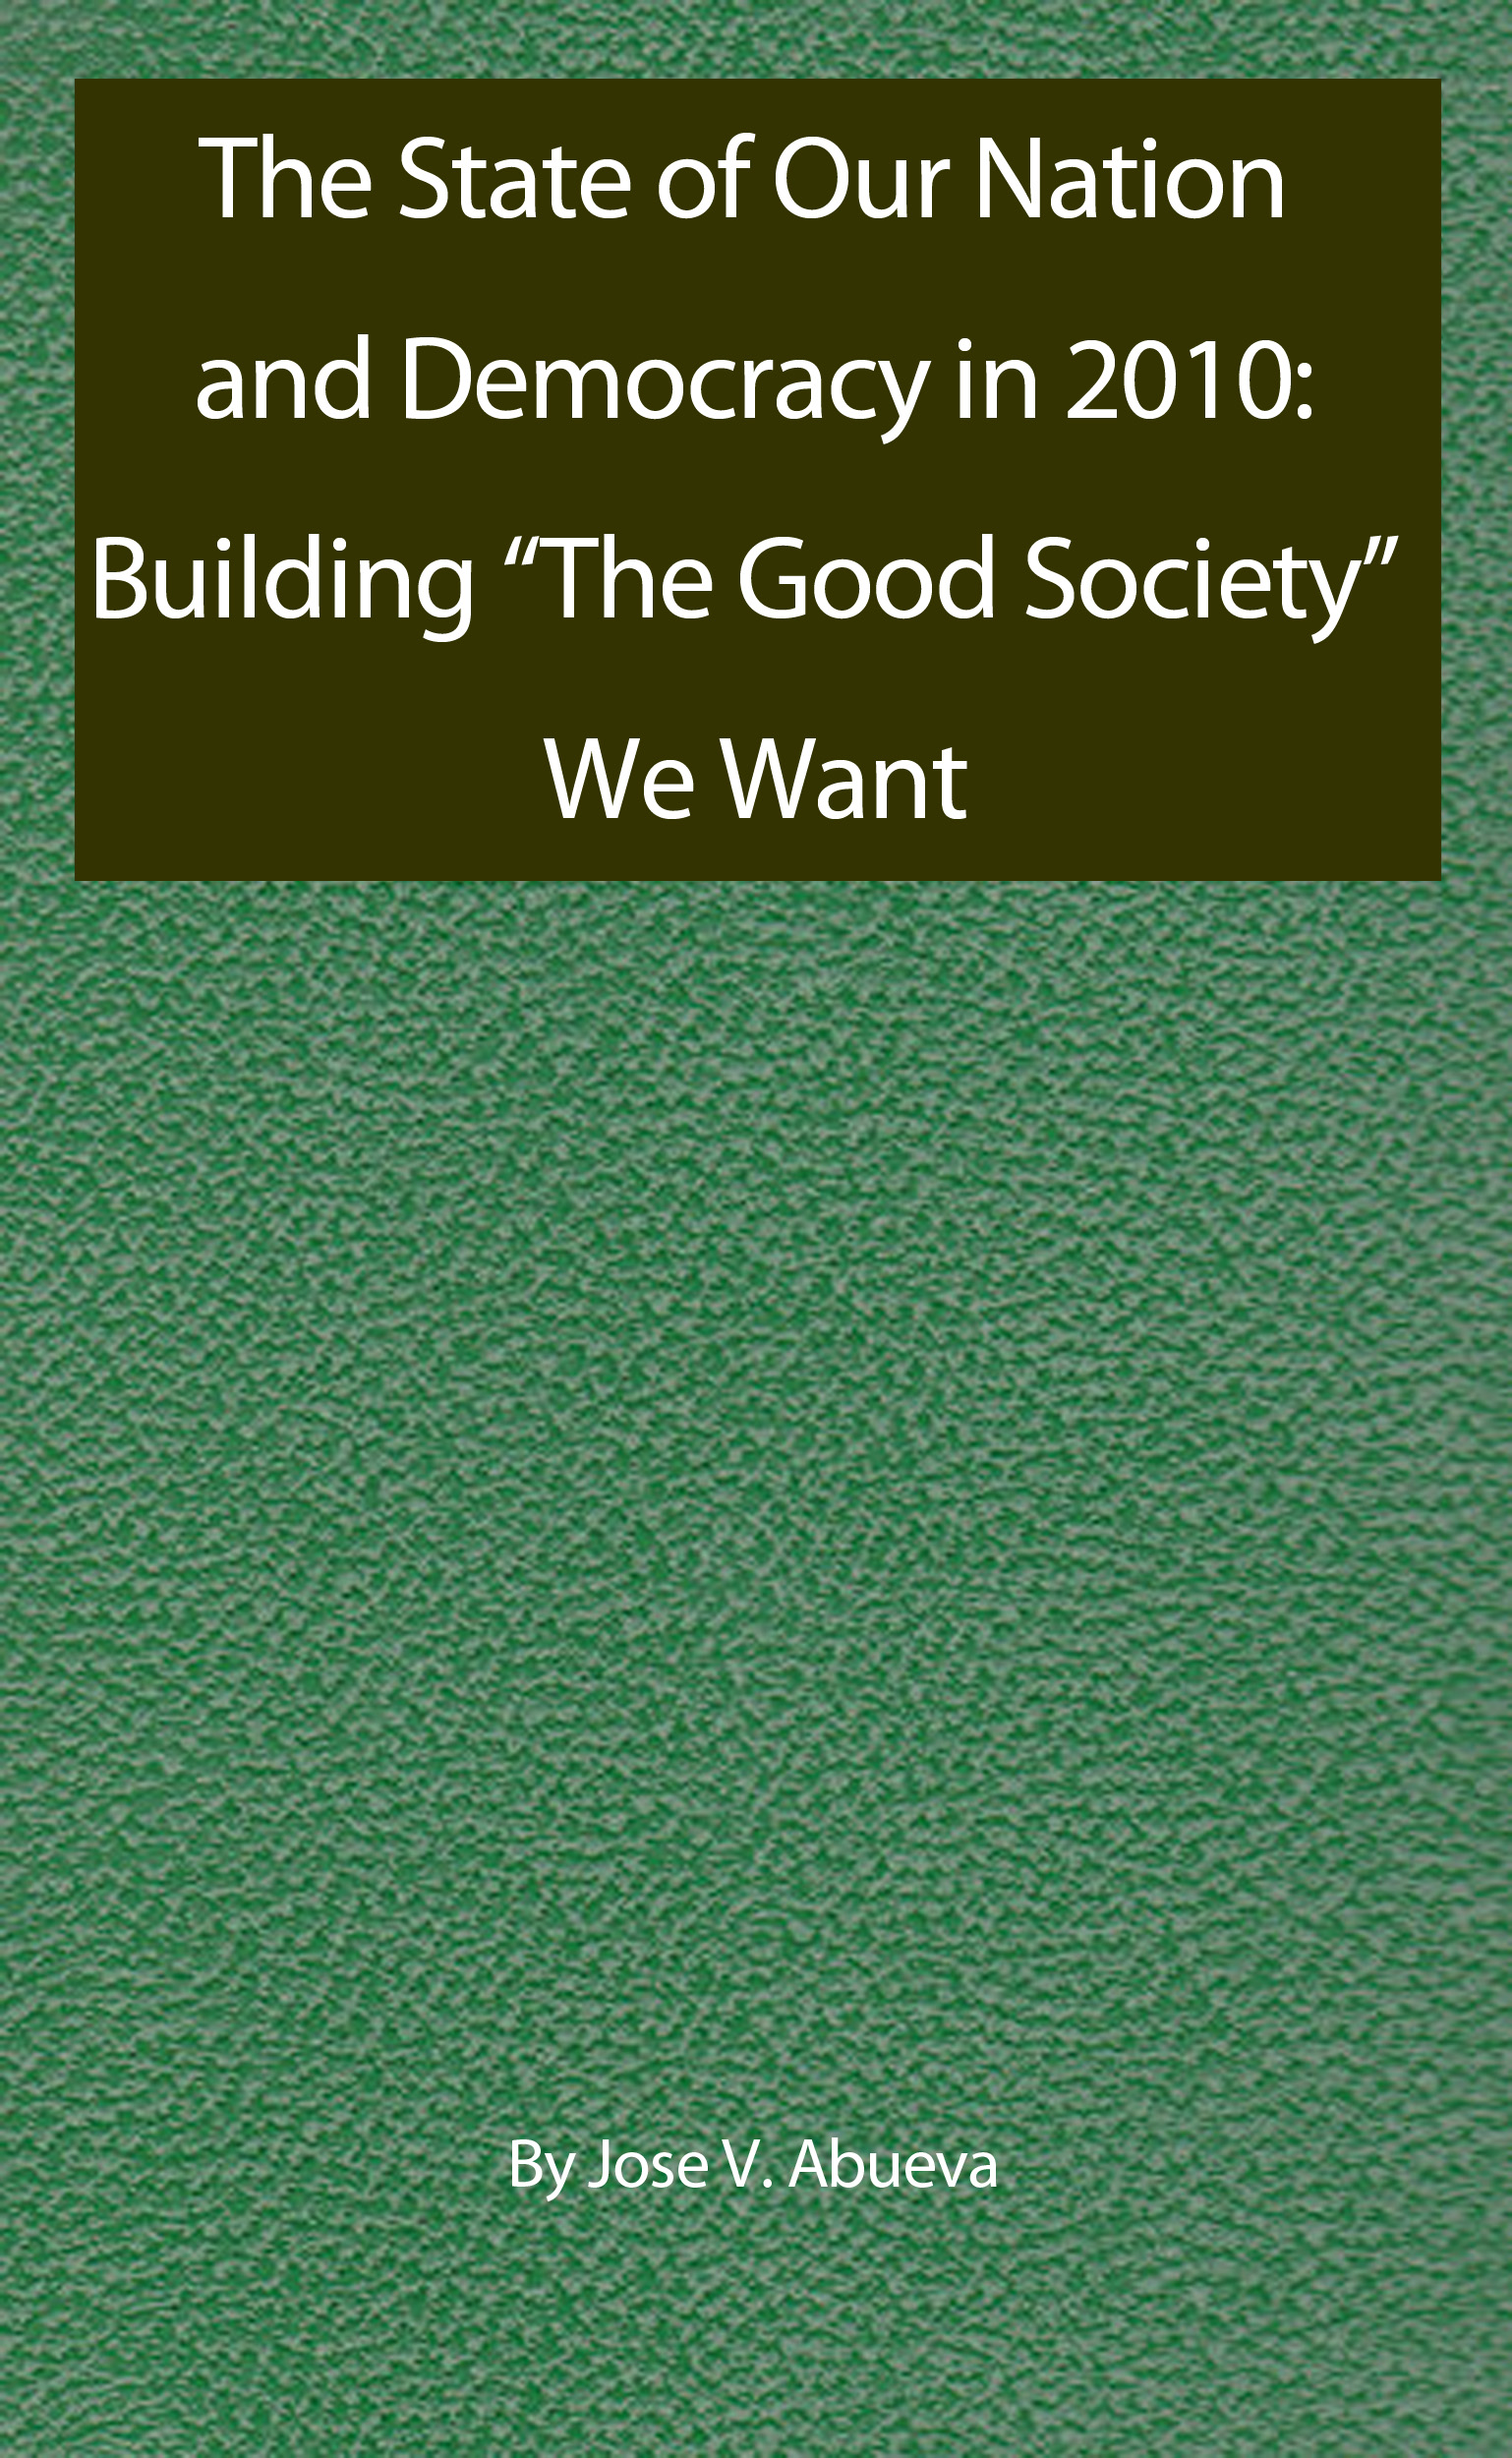 The State of Our Nation and Democracy in 2010: Building “The Good Society” We Want